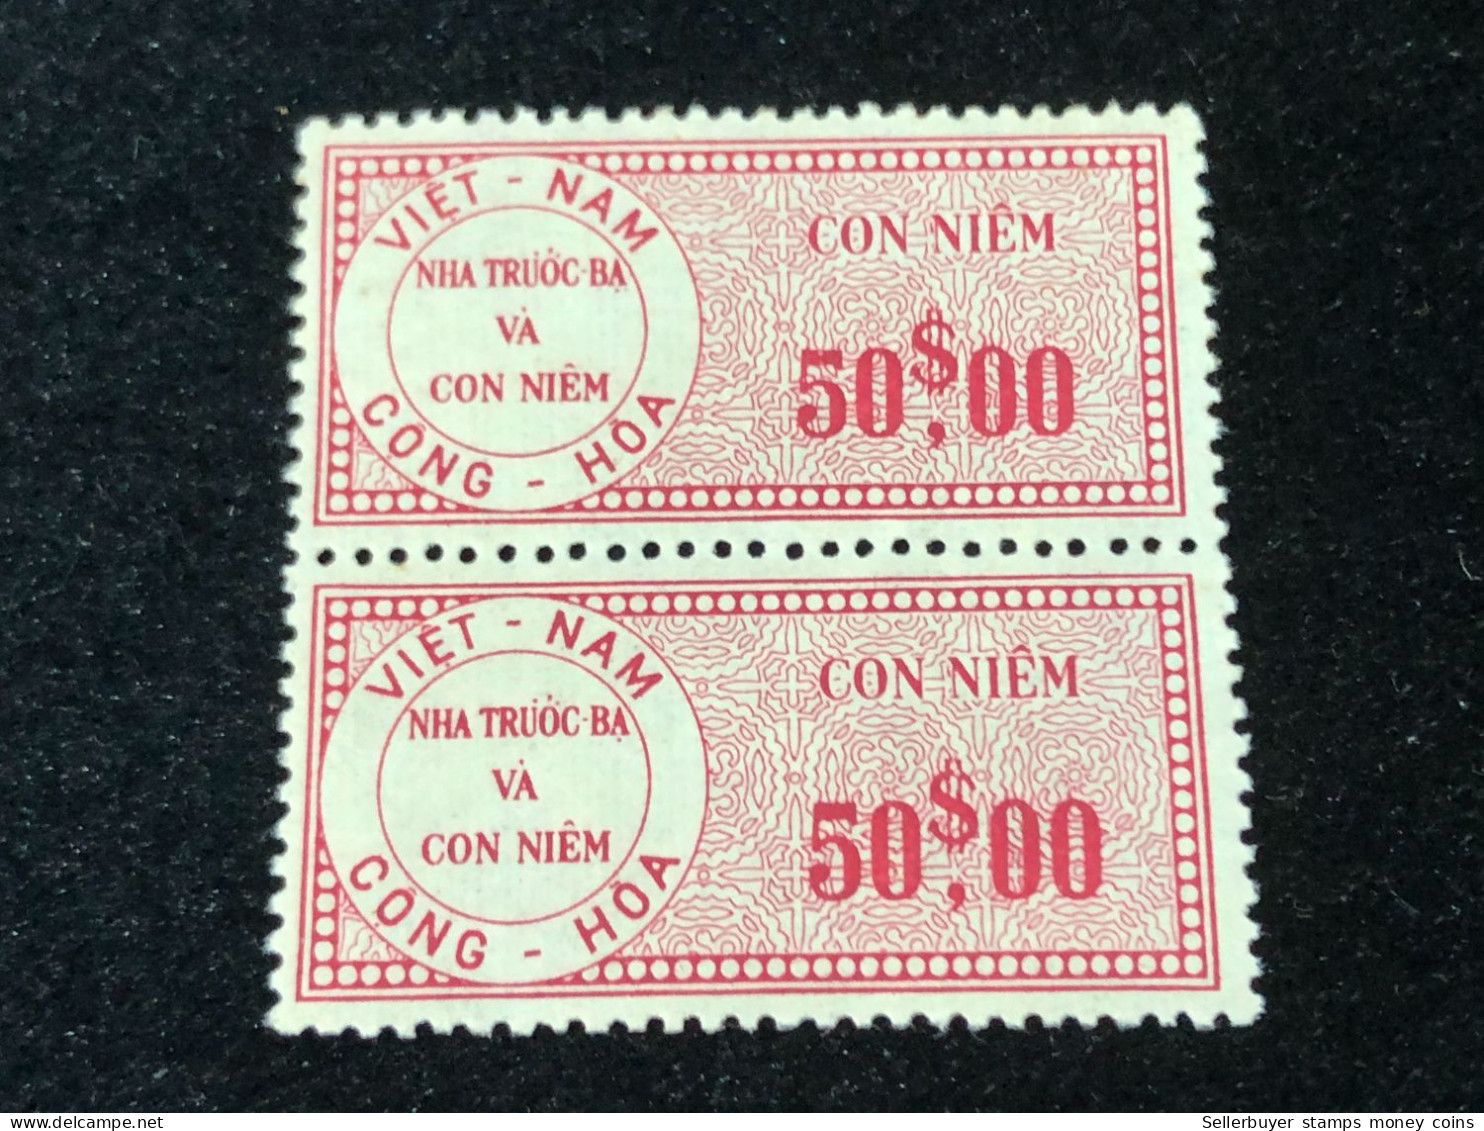 Vietnam South Wedge Before 1975( 50 $ The Wedge Has Not Been Used Yet) 2 Pcs 2 Stamps Quality Good - Collections